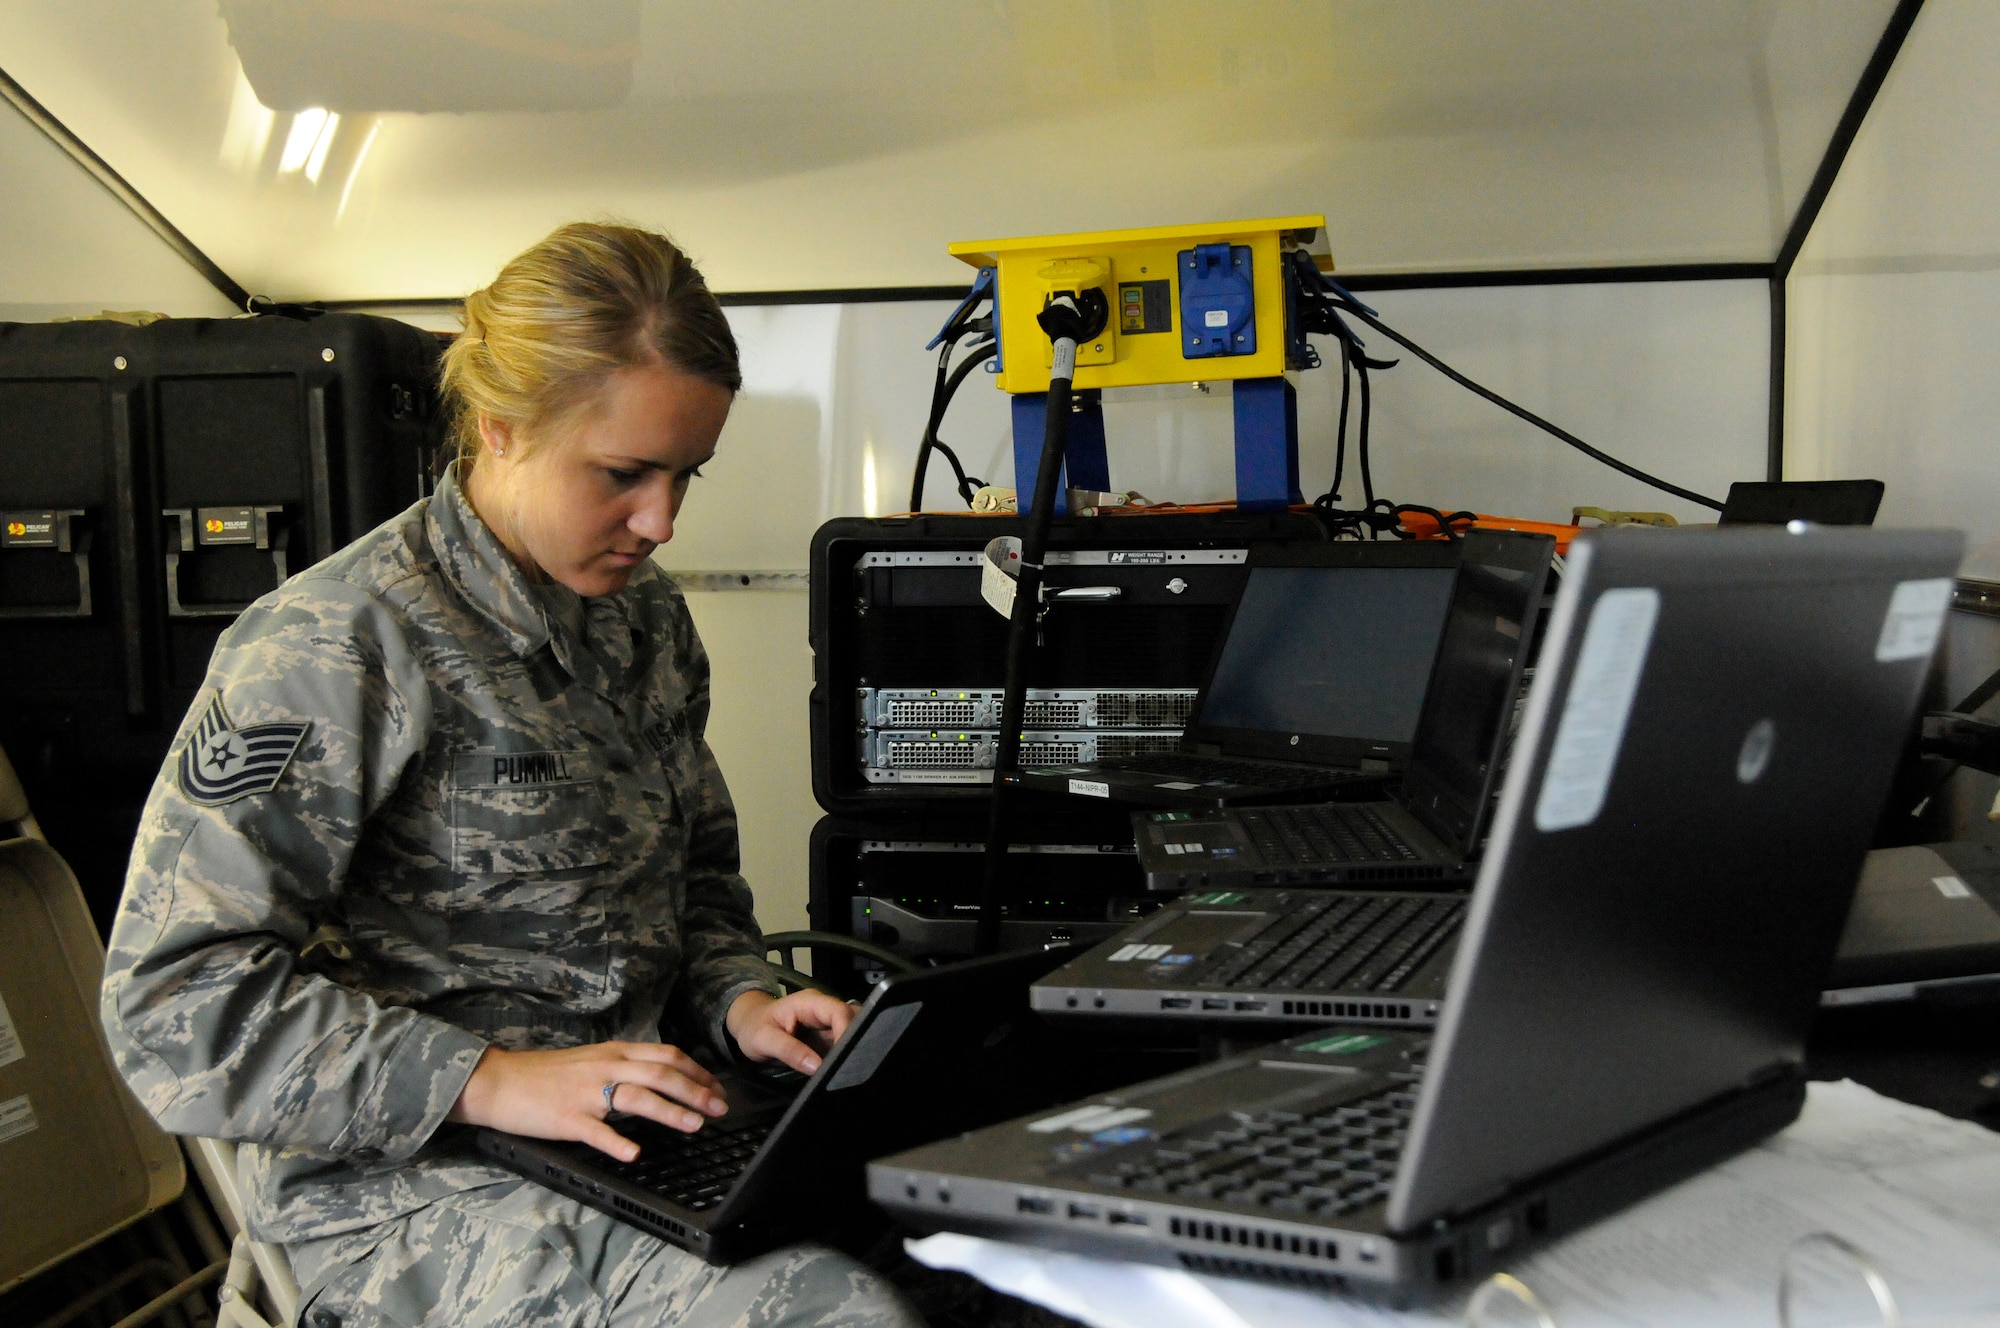 Tech. Sgt. Candace Pummill, a cyber systems operations specialist with the 264th Combat Communications Squadron, Peoria, Ill., configures a laptop computer for use inside the Joint Incident Site Communications Capability (JISCC) trailer June 16, 2015, at the Boone County Fire District Training Center near Columbia, Mo. (U.S. Air National Guard photo by Tech. Sgt. Todd Pendleton)(Released)